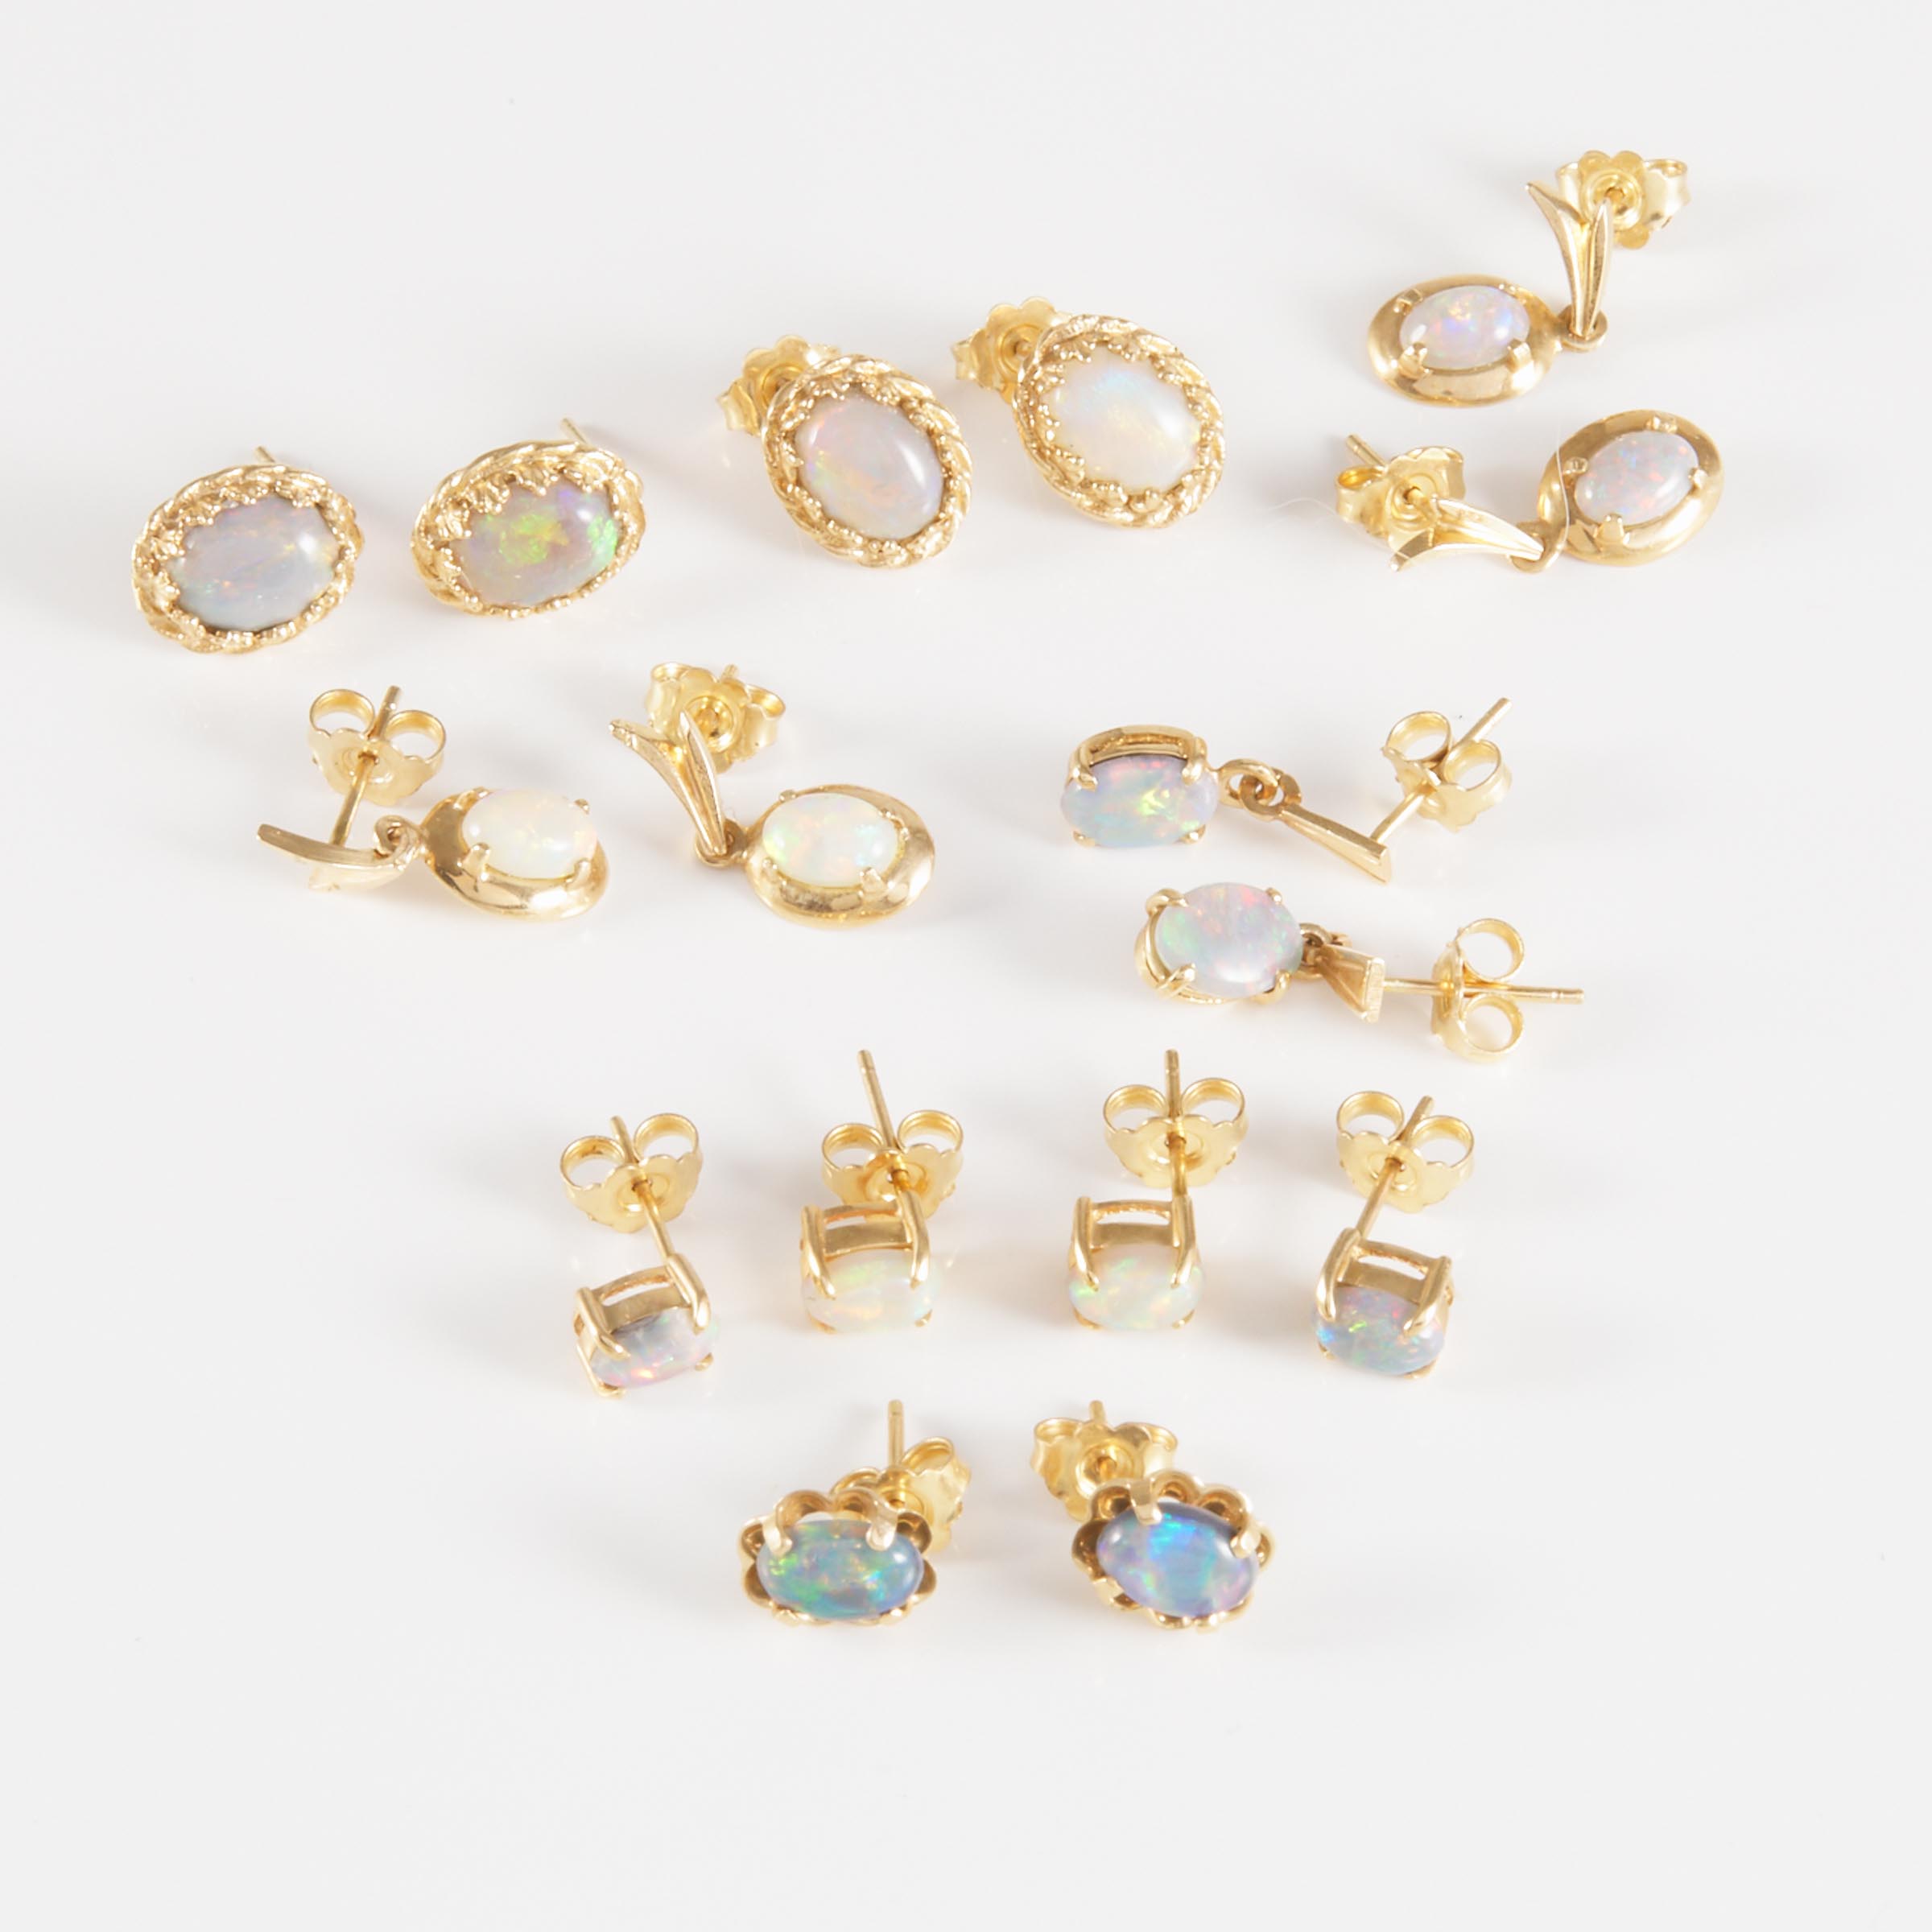 8 Pairs of Small Yellow Gold Earrings